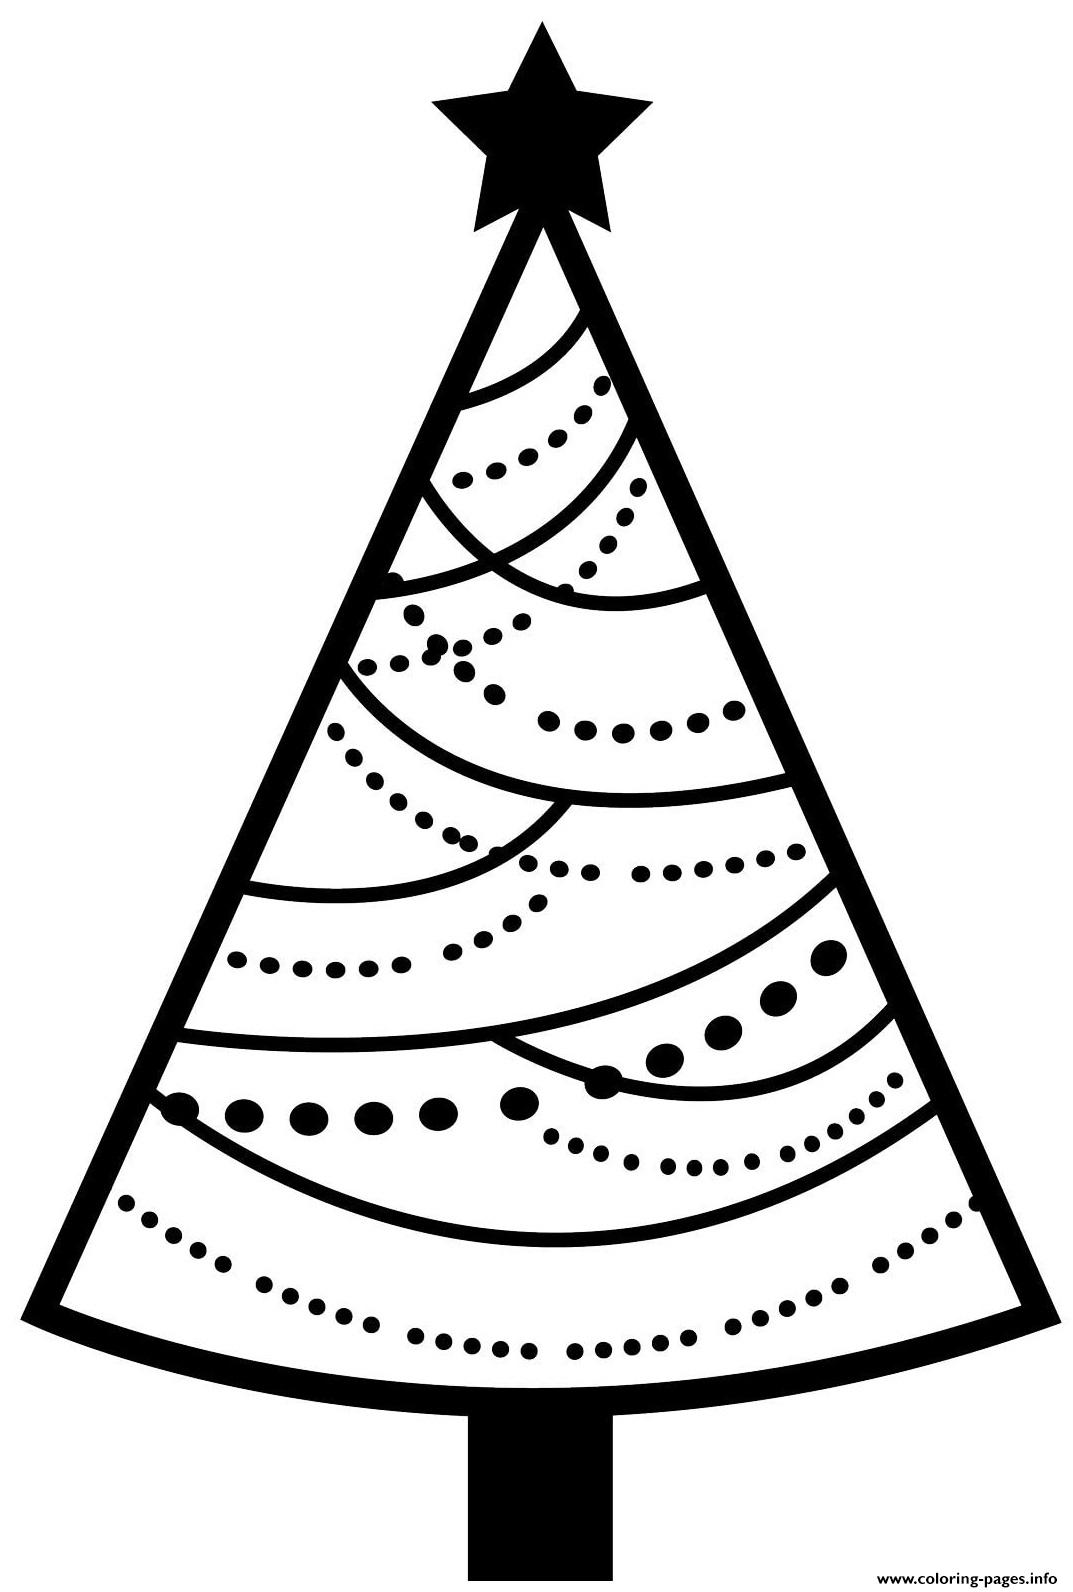 Pretty And Simple Christmas Tree With Garlands Coloring page Printable